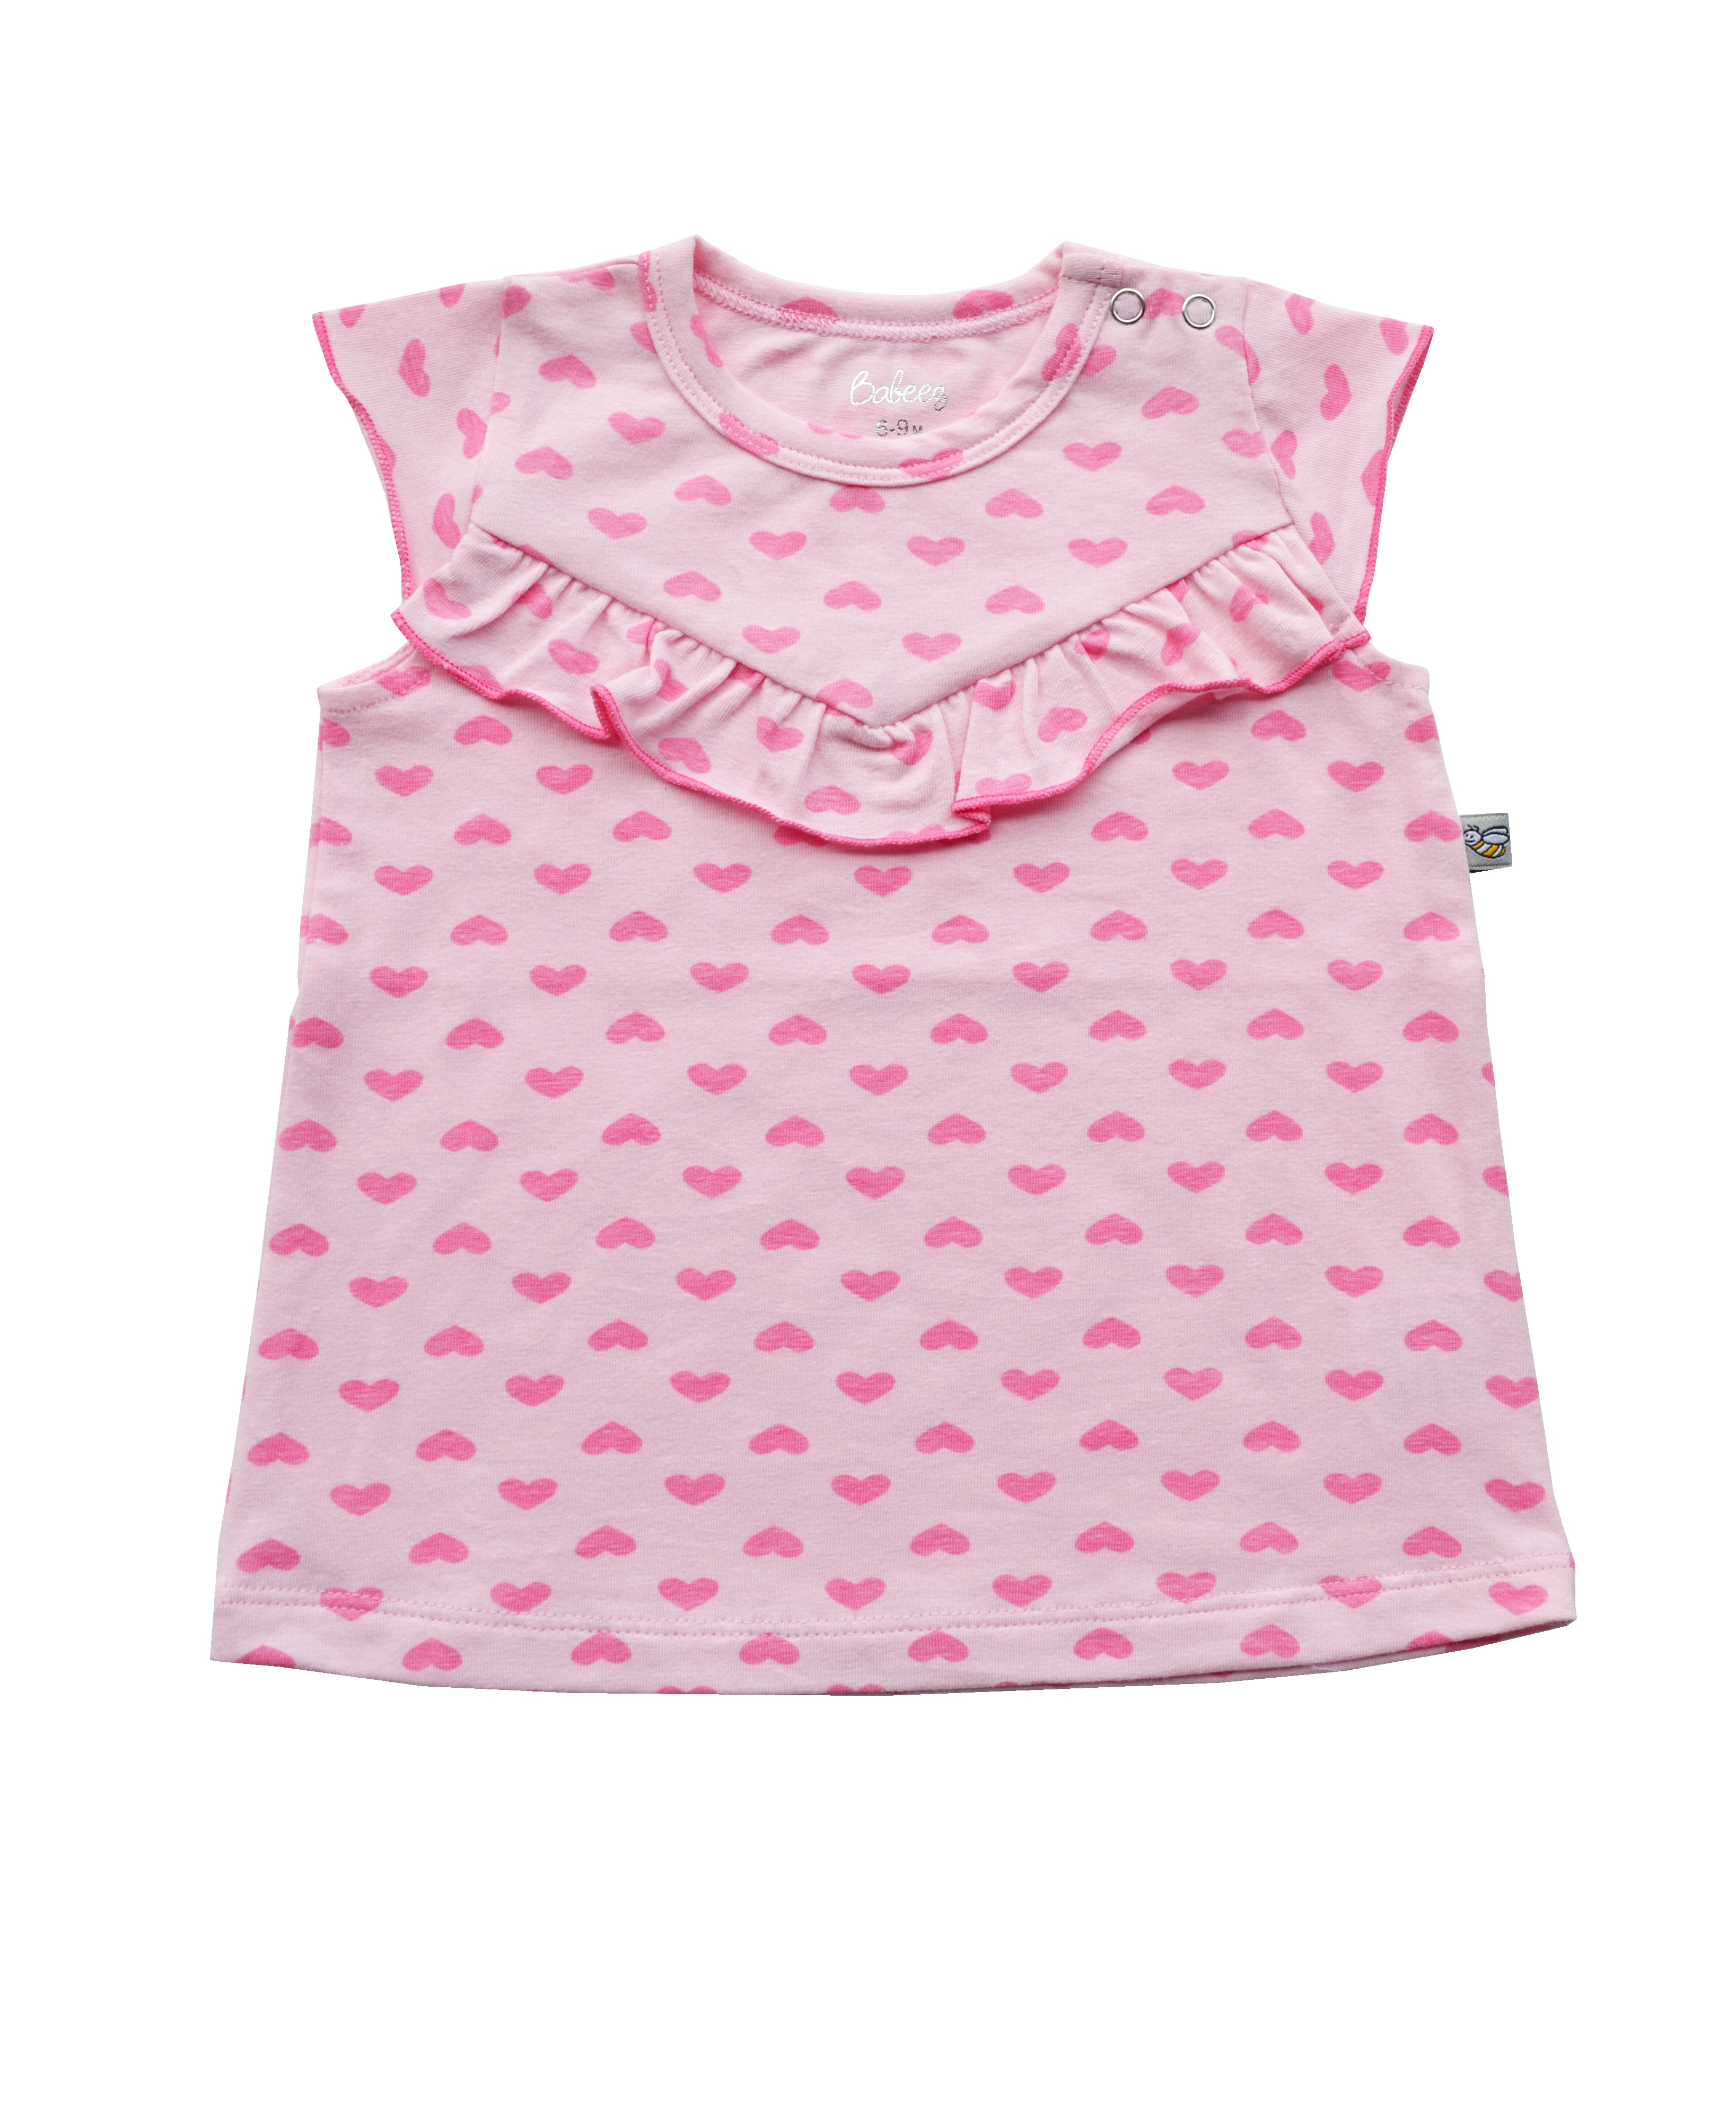 Allover Heart Print on Pink Sleeveless Top (95% Cotton 5% Elasthan Jersey)